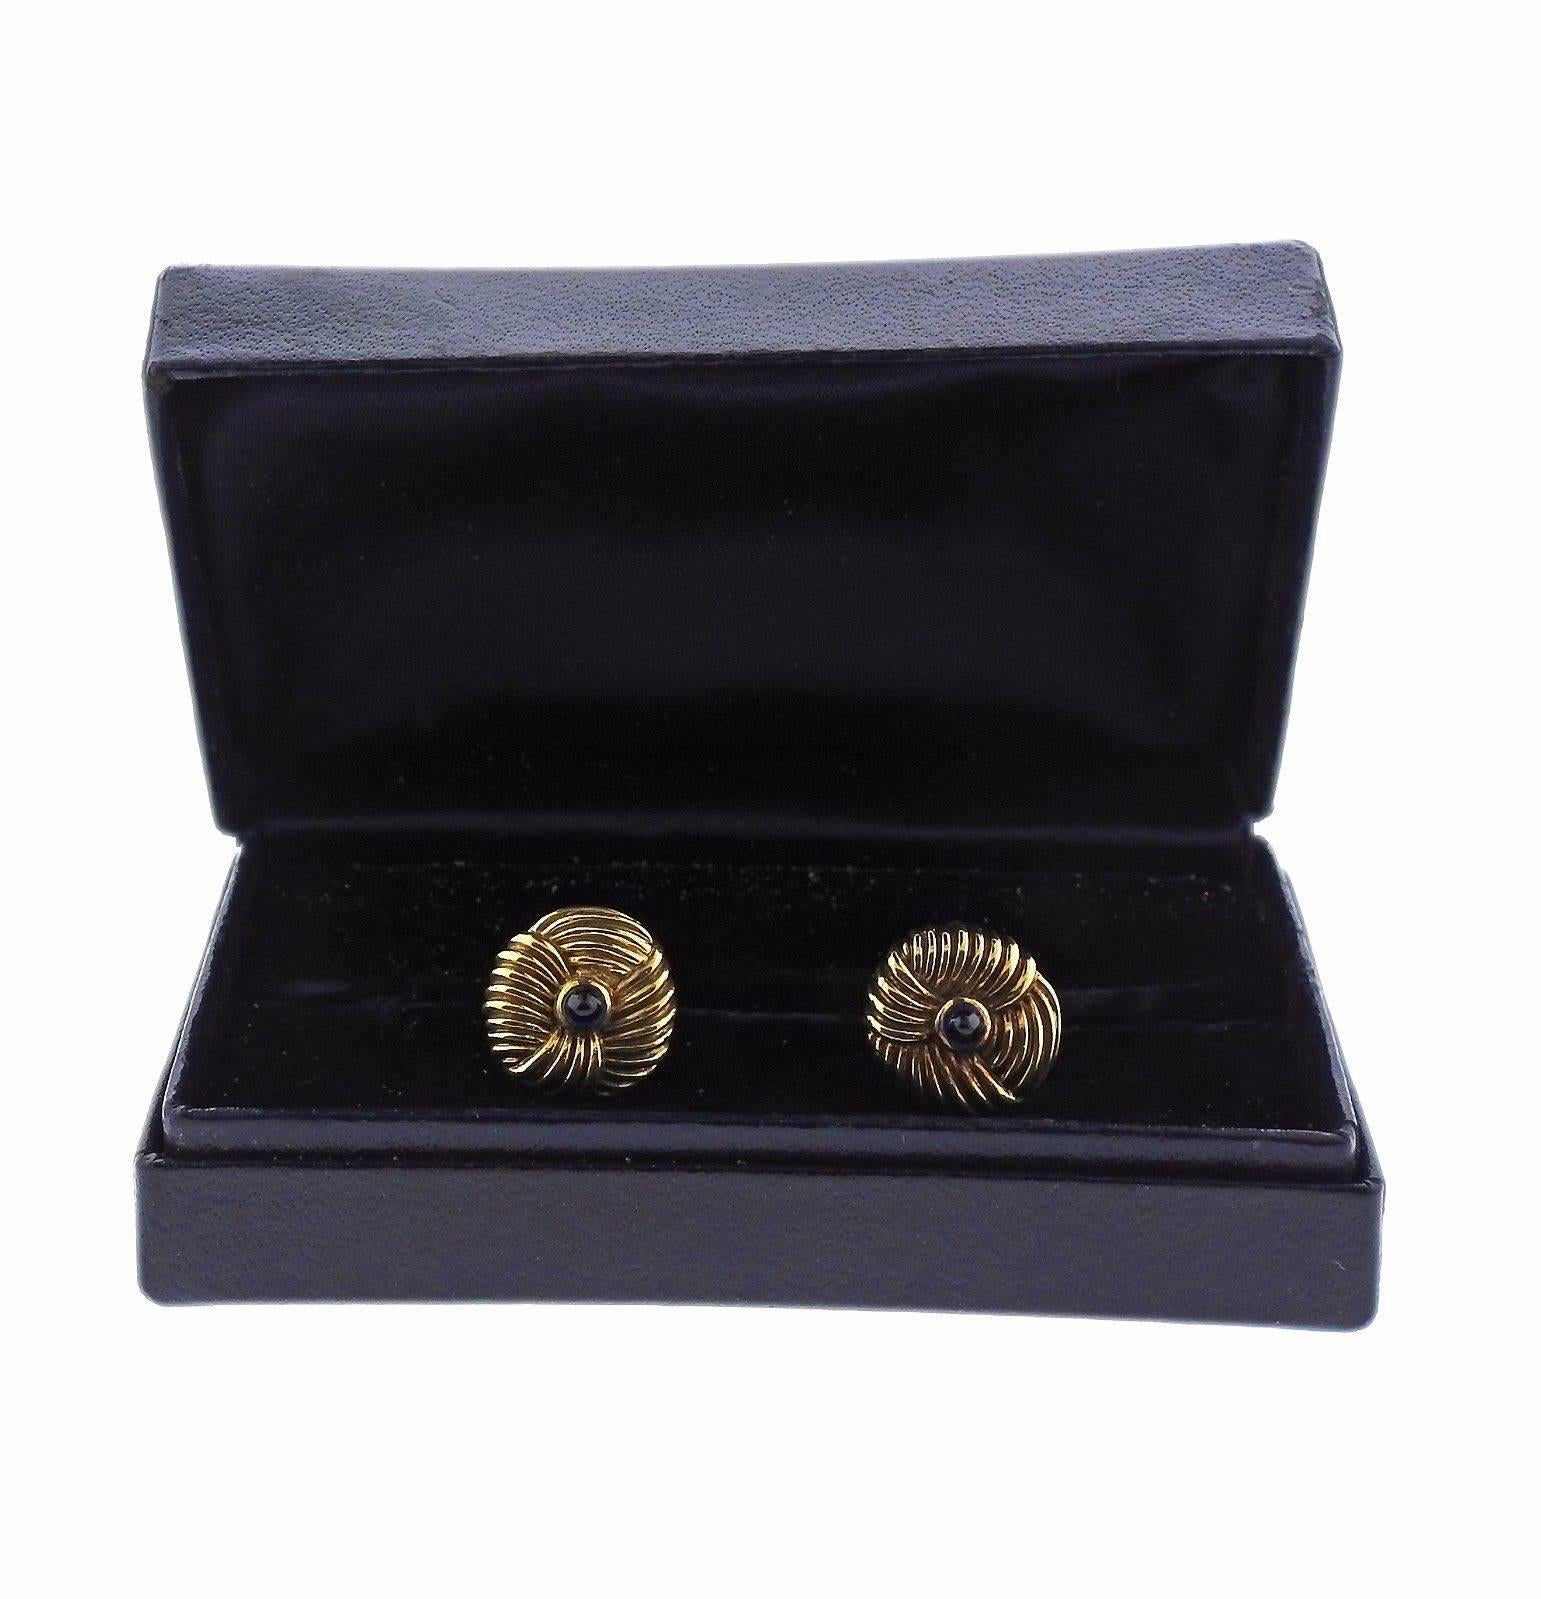 A pair of 18k yellow gold cufflinks set with sapphires.  The cufflinks measure 15mm in front and 11mm in back. The set weighs 17.4 grams.  Marked: Tiffany, Schlumberger.